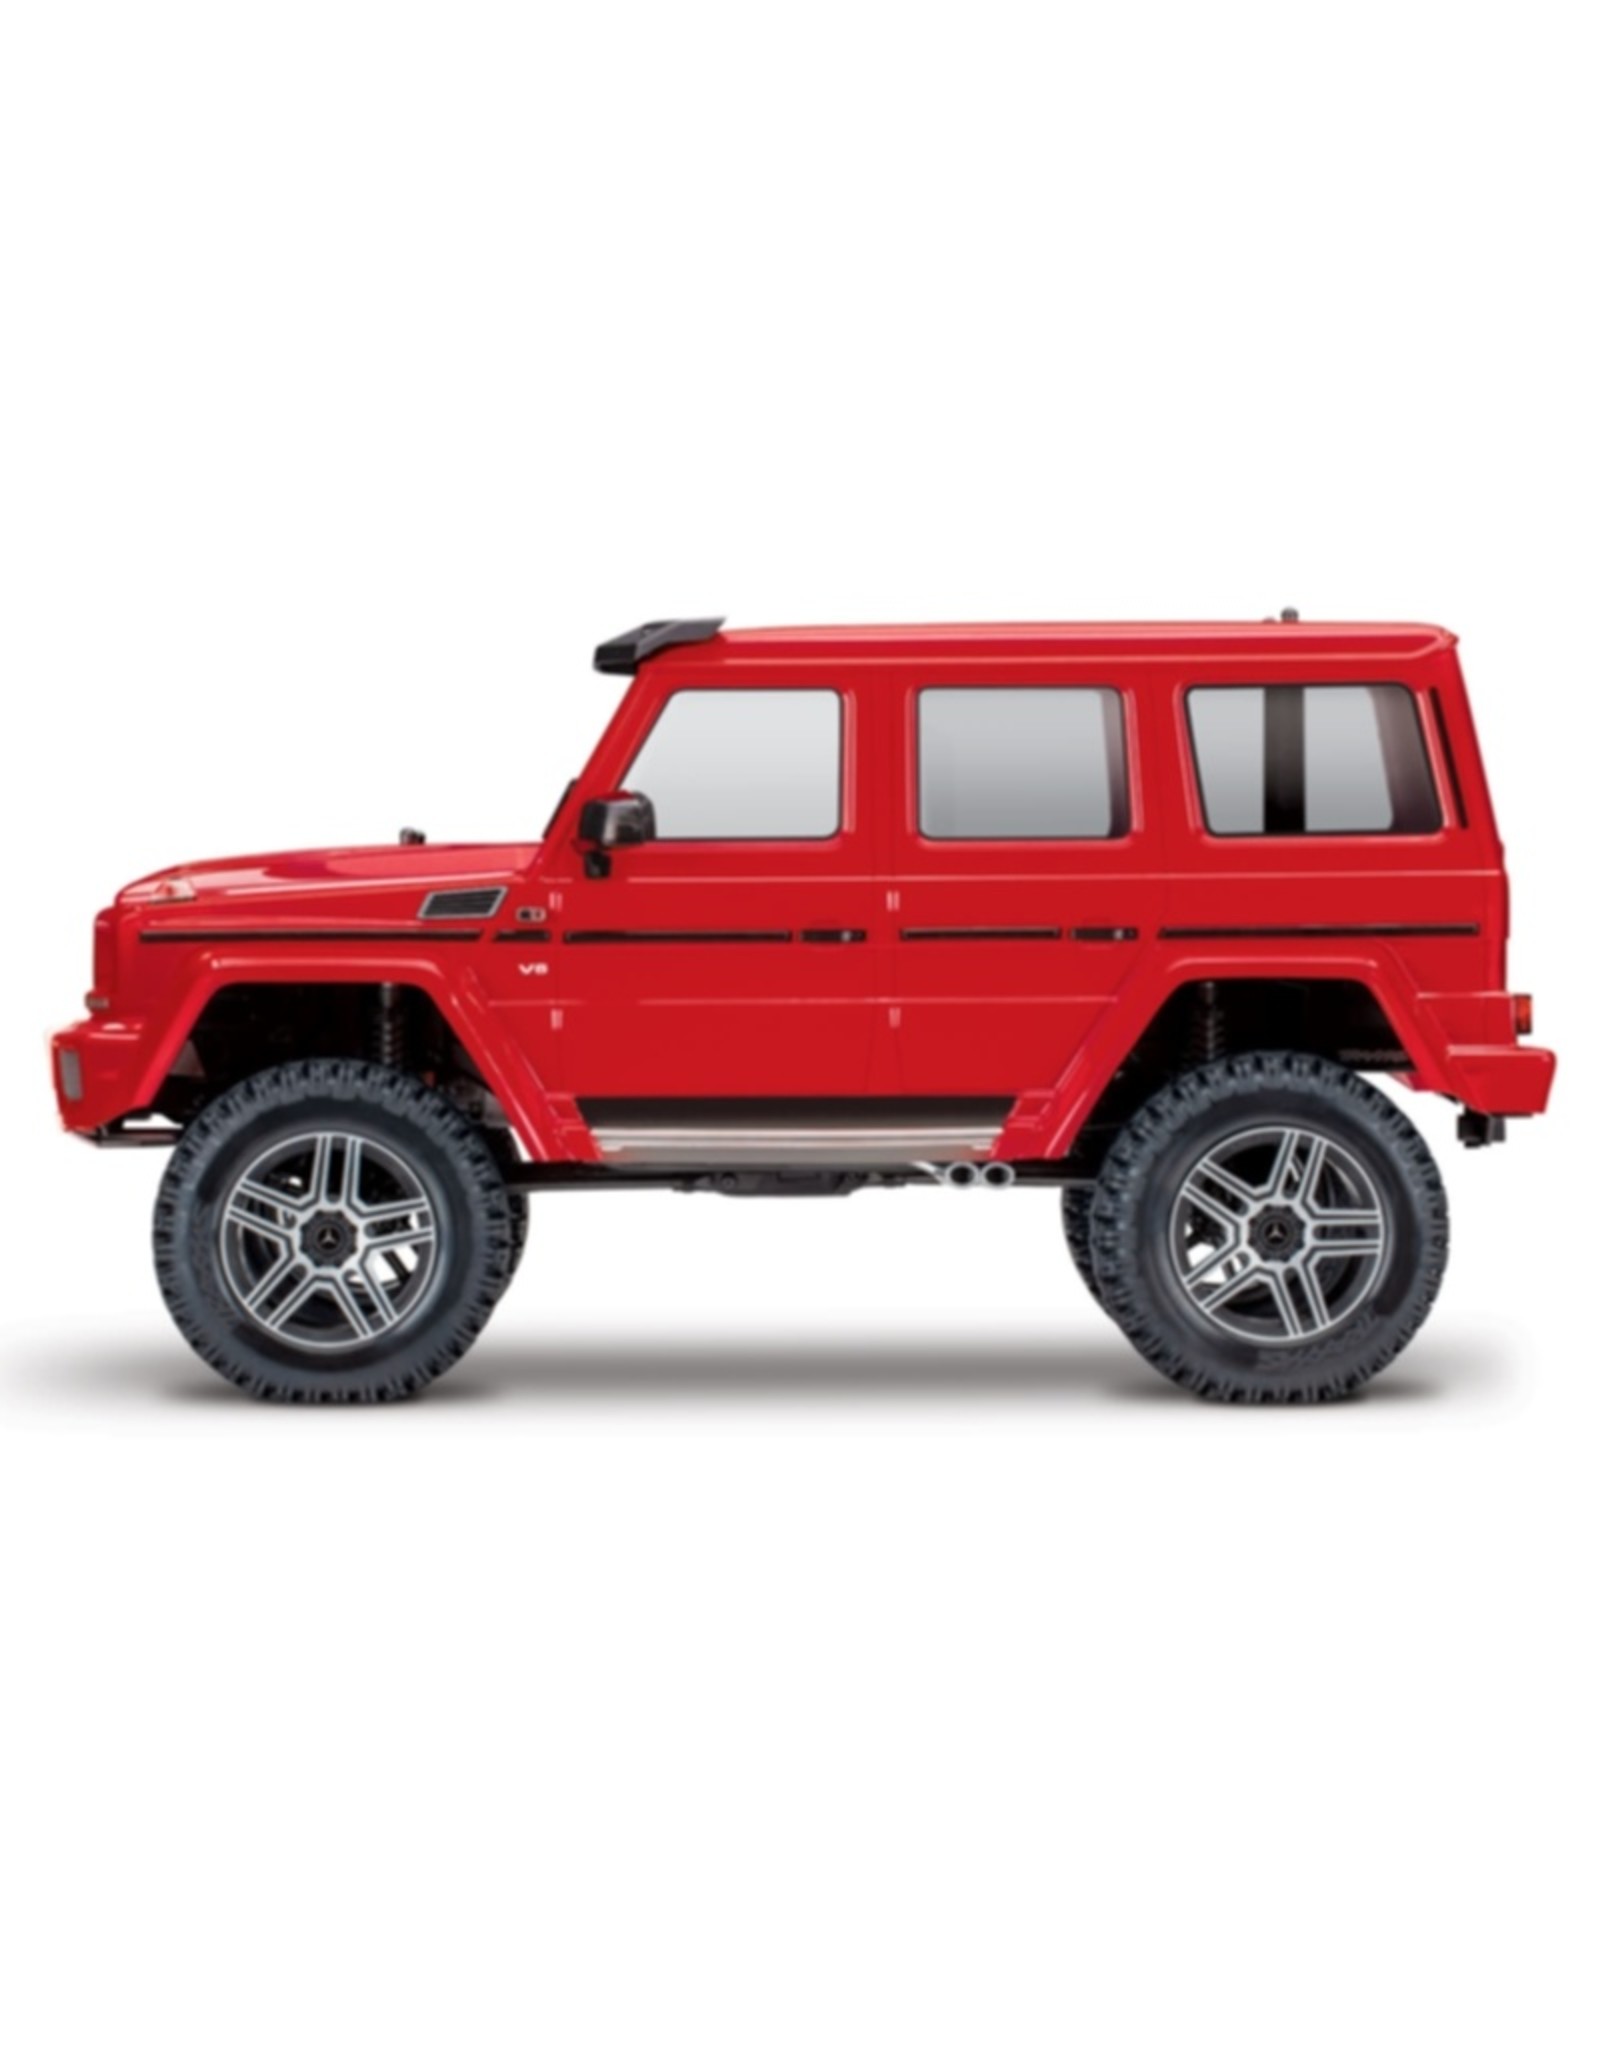 TRA TRA82096-4 Red TRX-4® Scale and Trail™ Crawler with Mercedes-Benz® G 500® 4x4² Body: 1/10 Scale 4WD Electric Trail Truck. Ready-to-Drive® with TQi Traxxas Link™